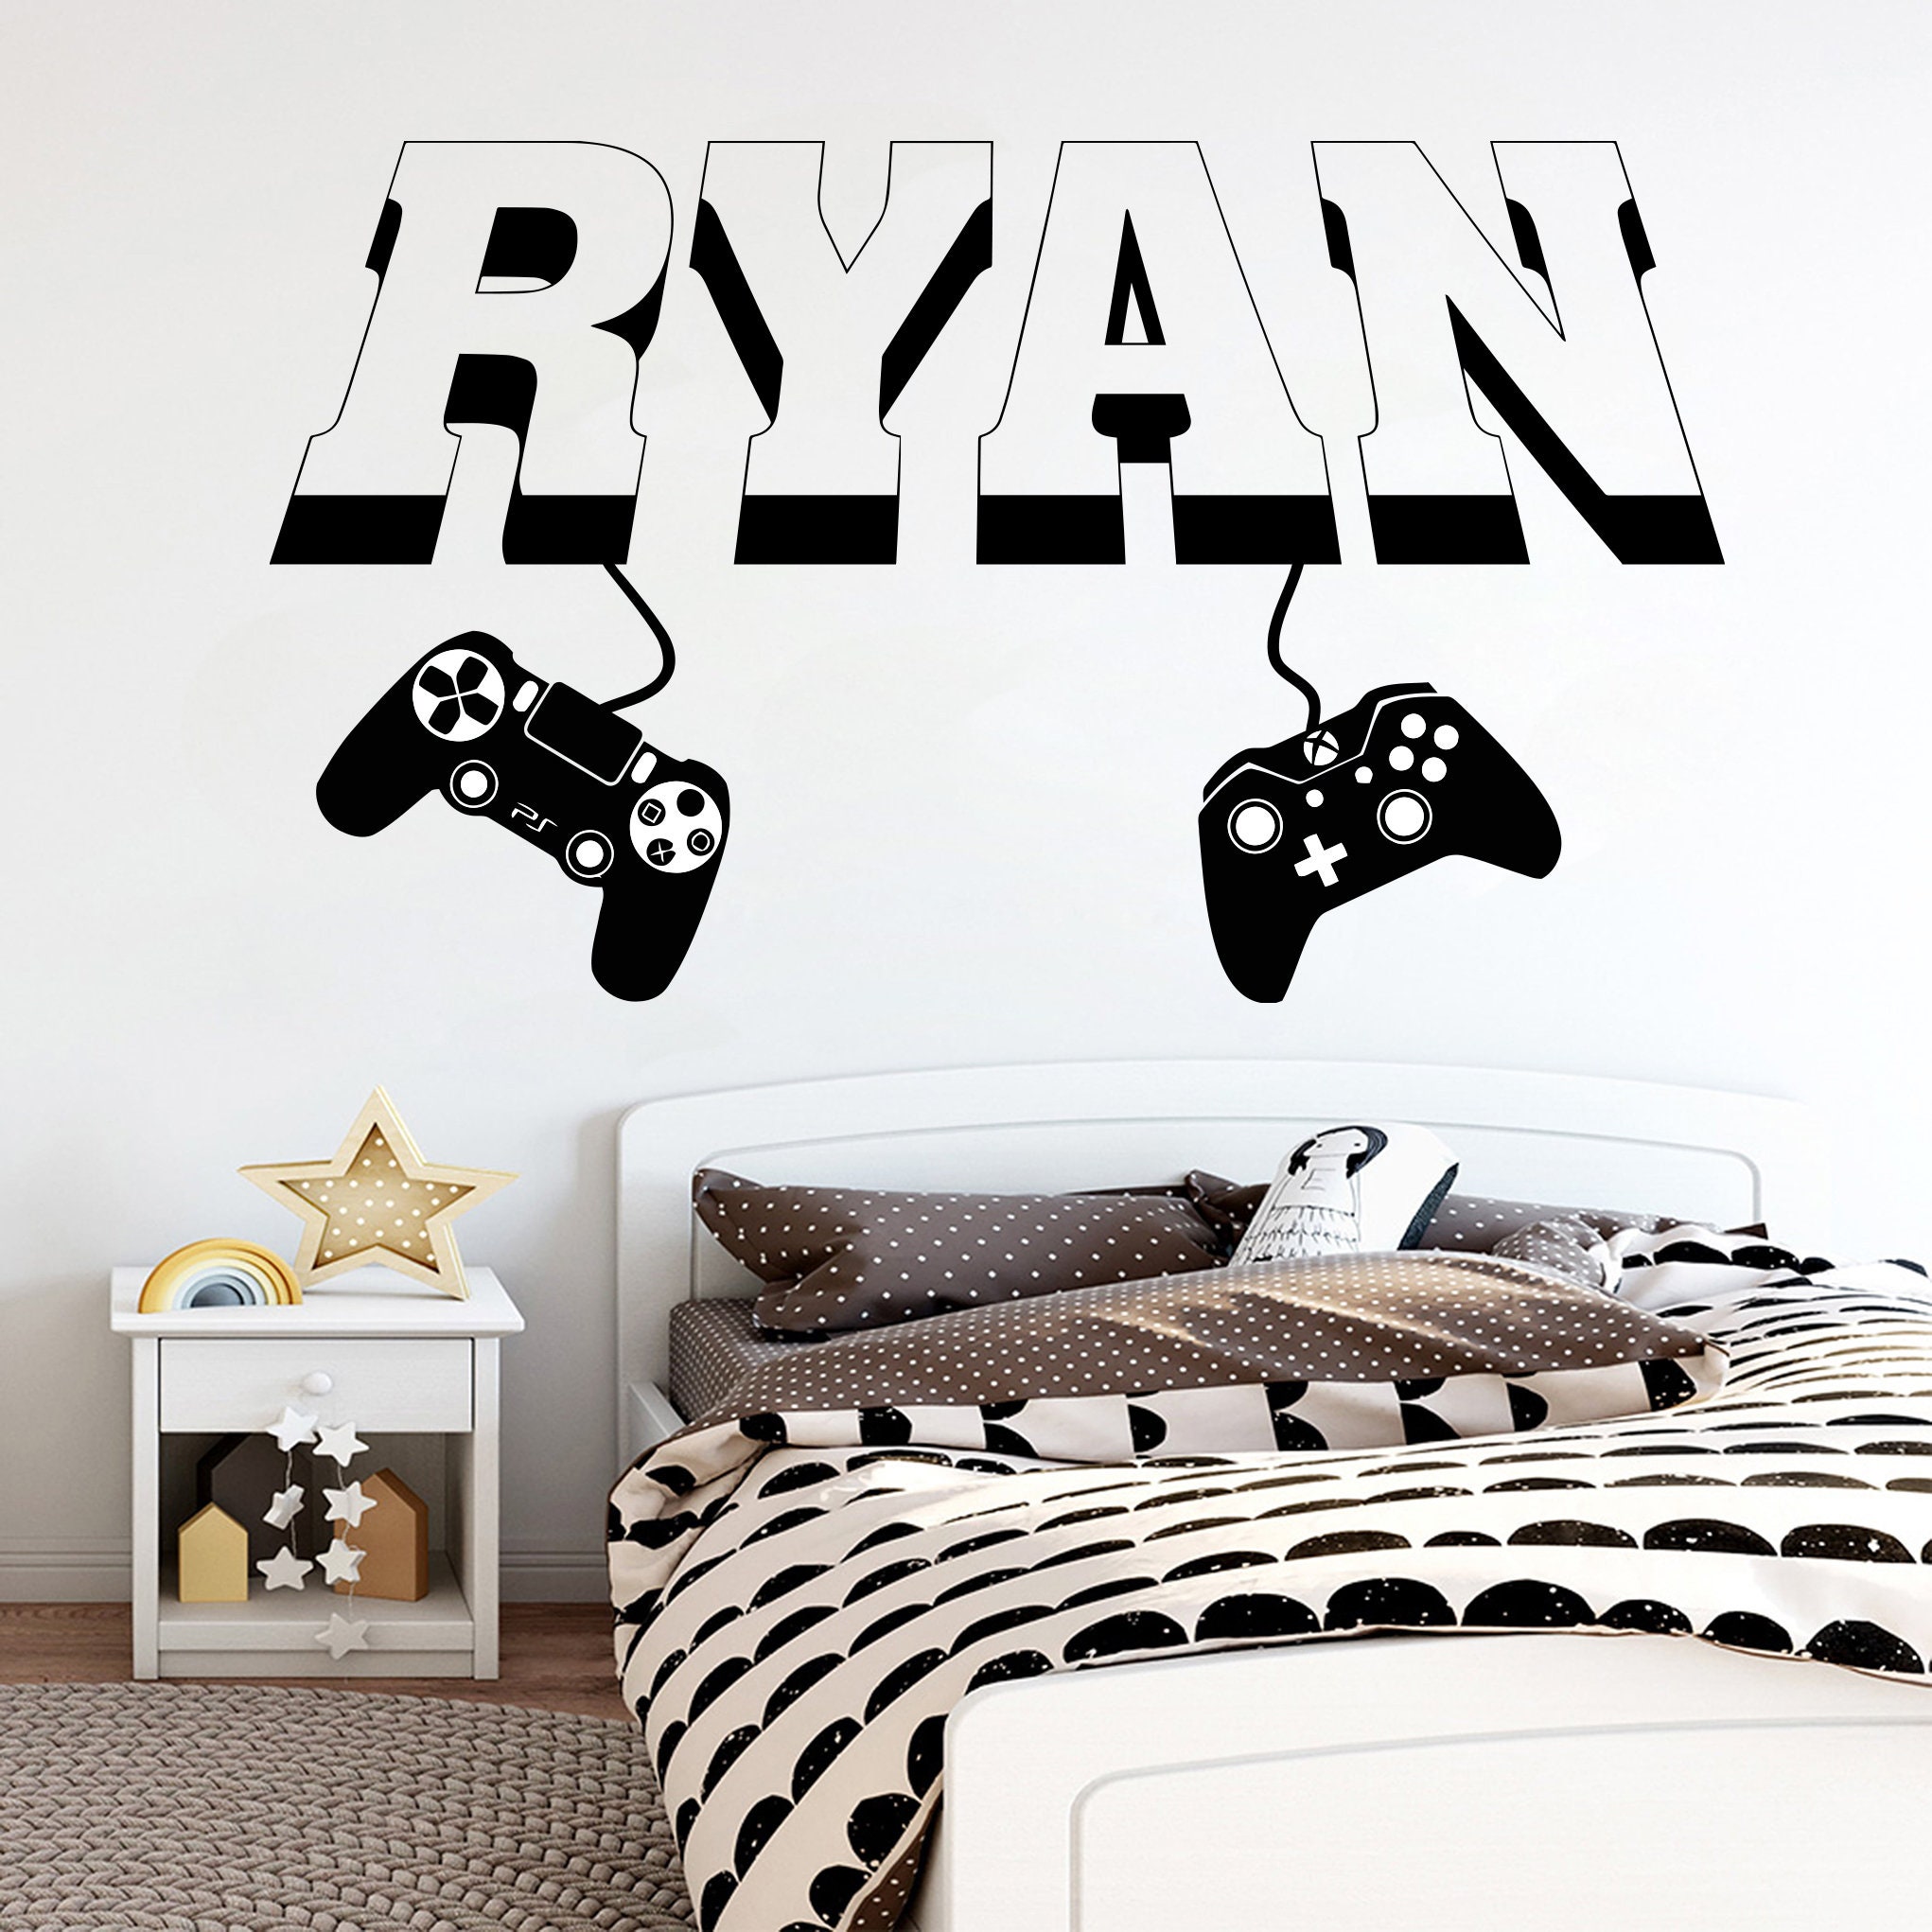 Gamer Wall Decal Video Games Wall Sticker Controller Wall Decal Gaming Room Wall Art vg049